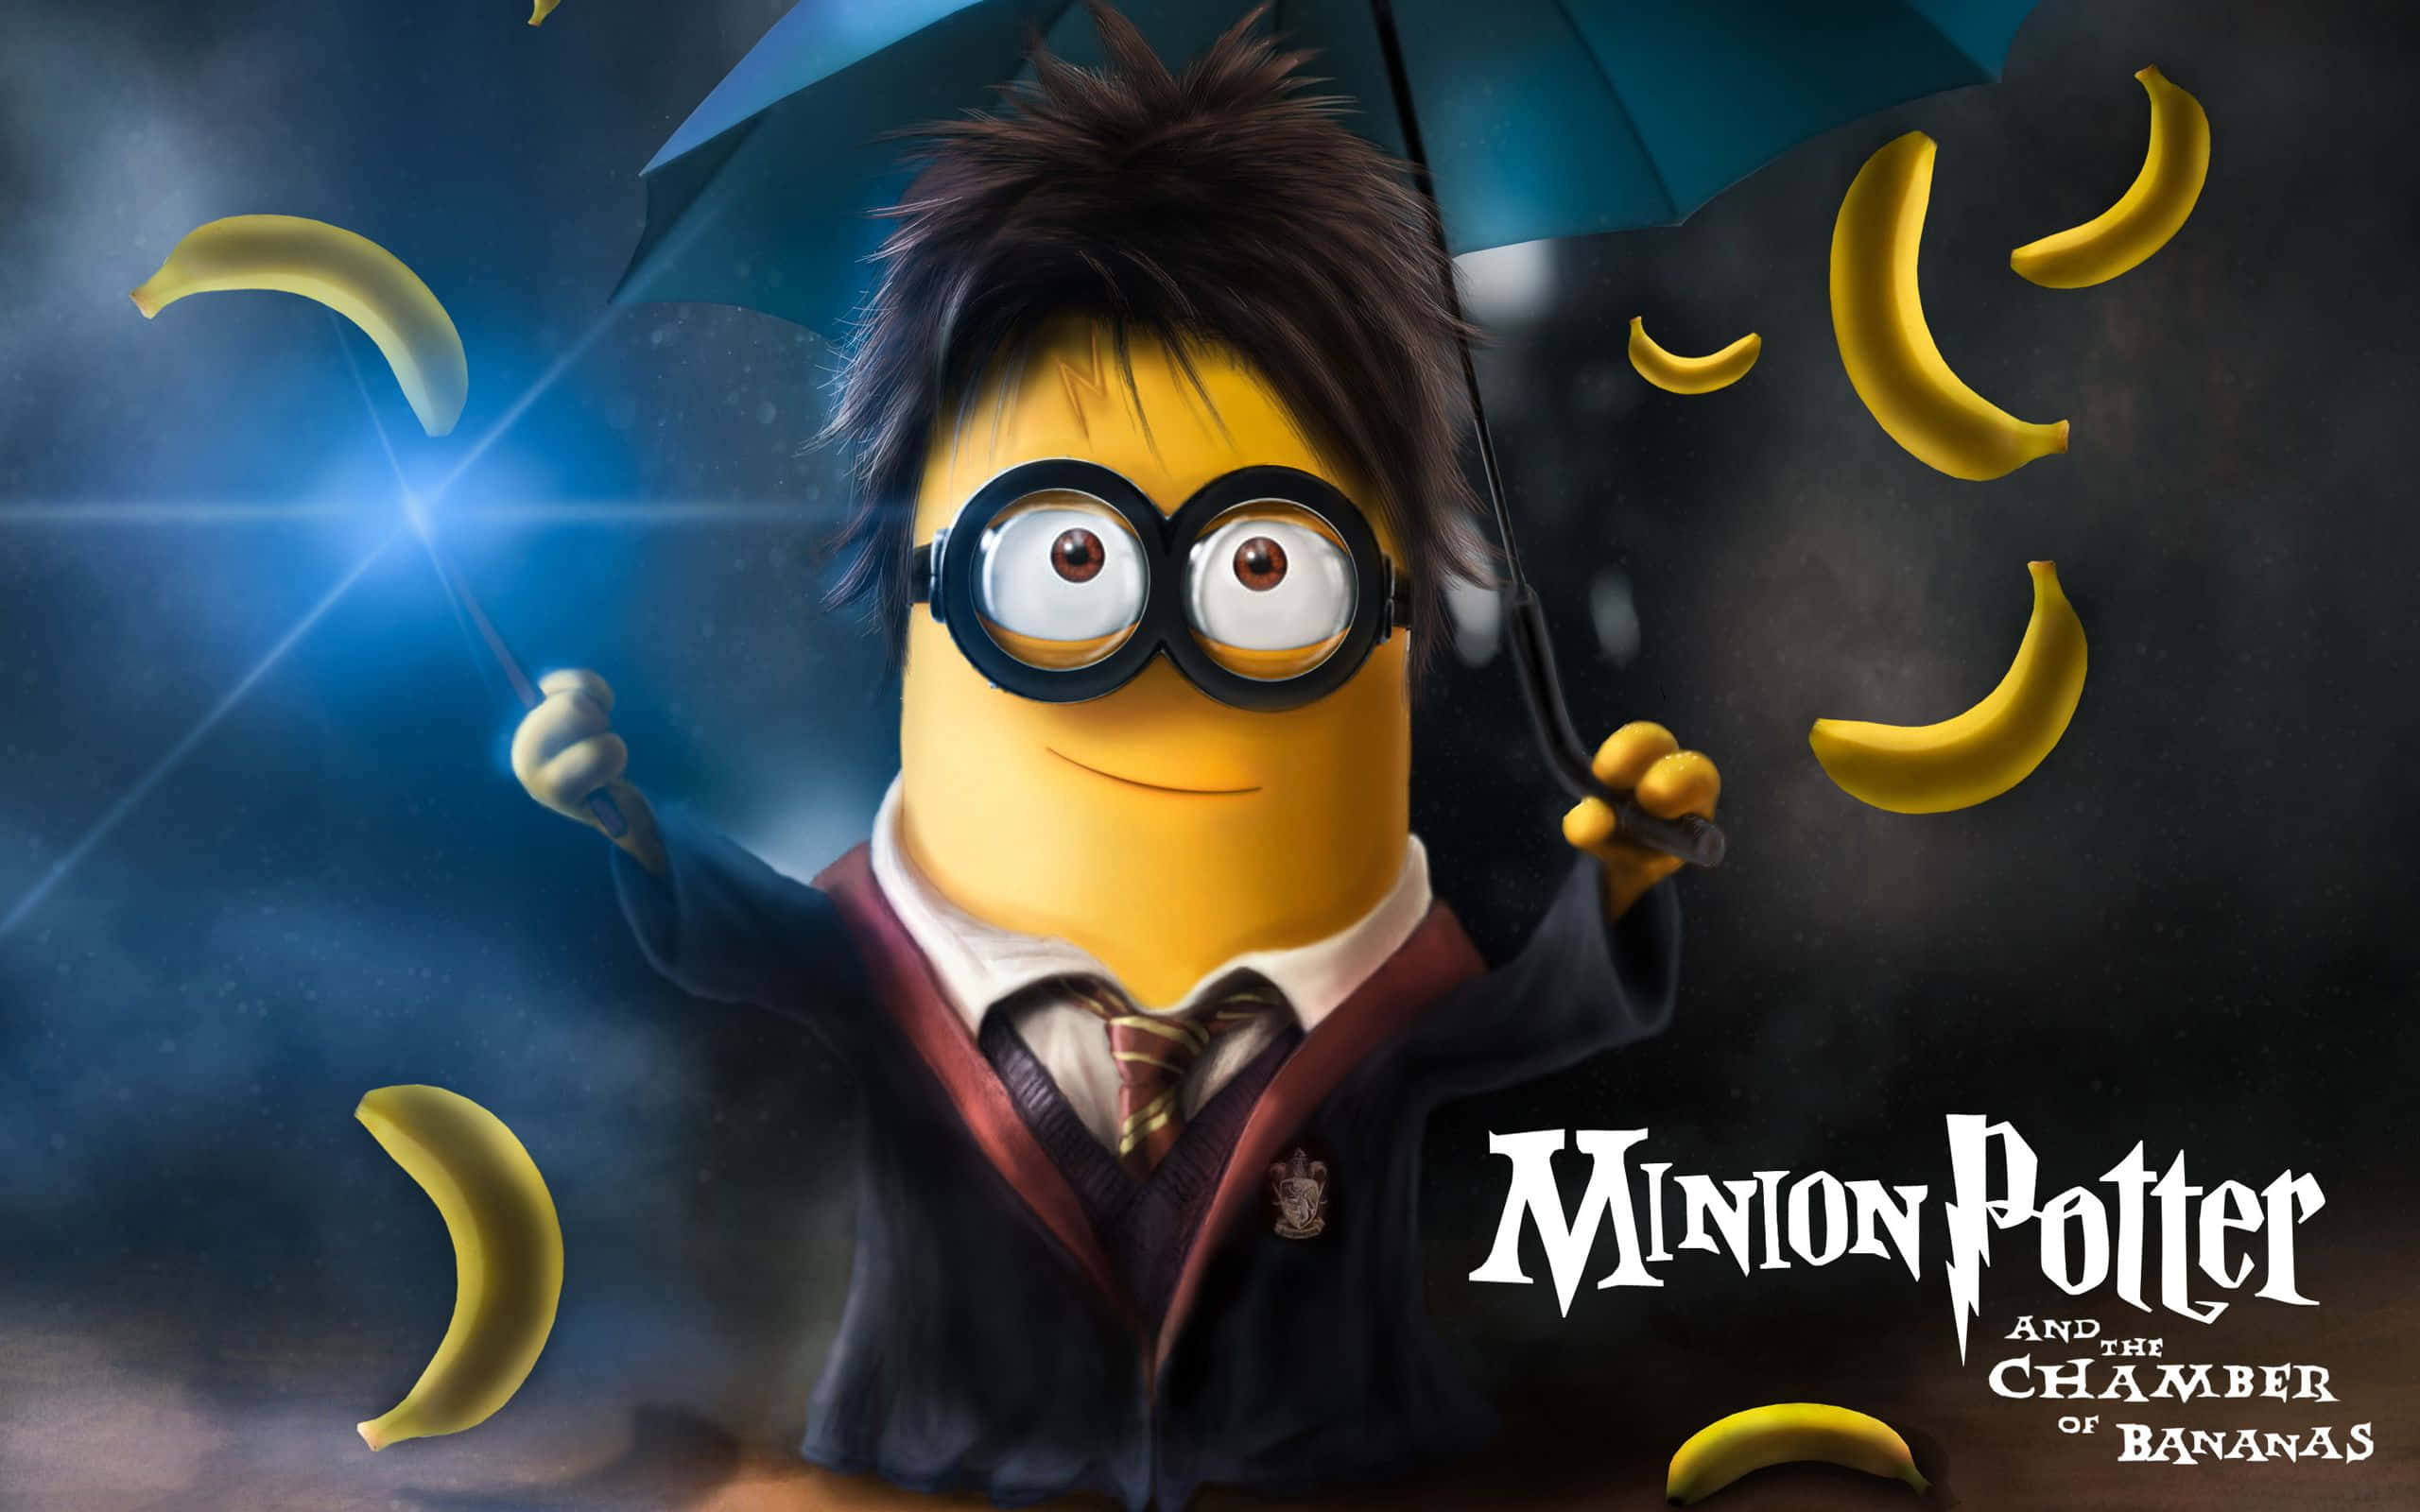 Get your groove on with Minions!